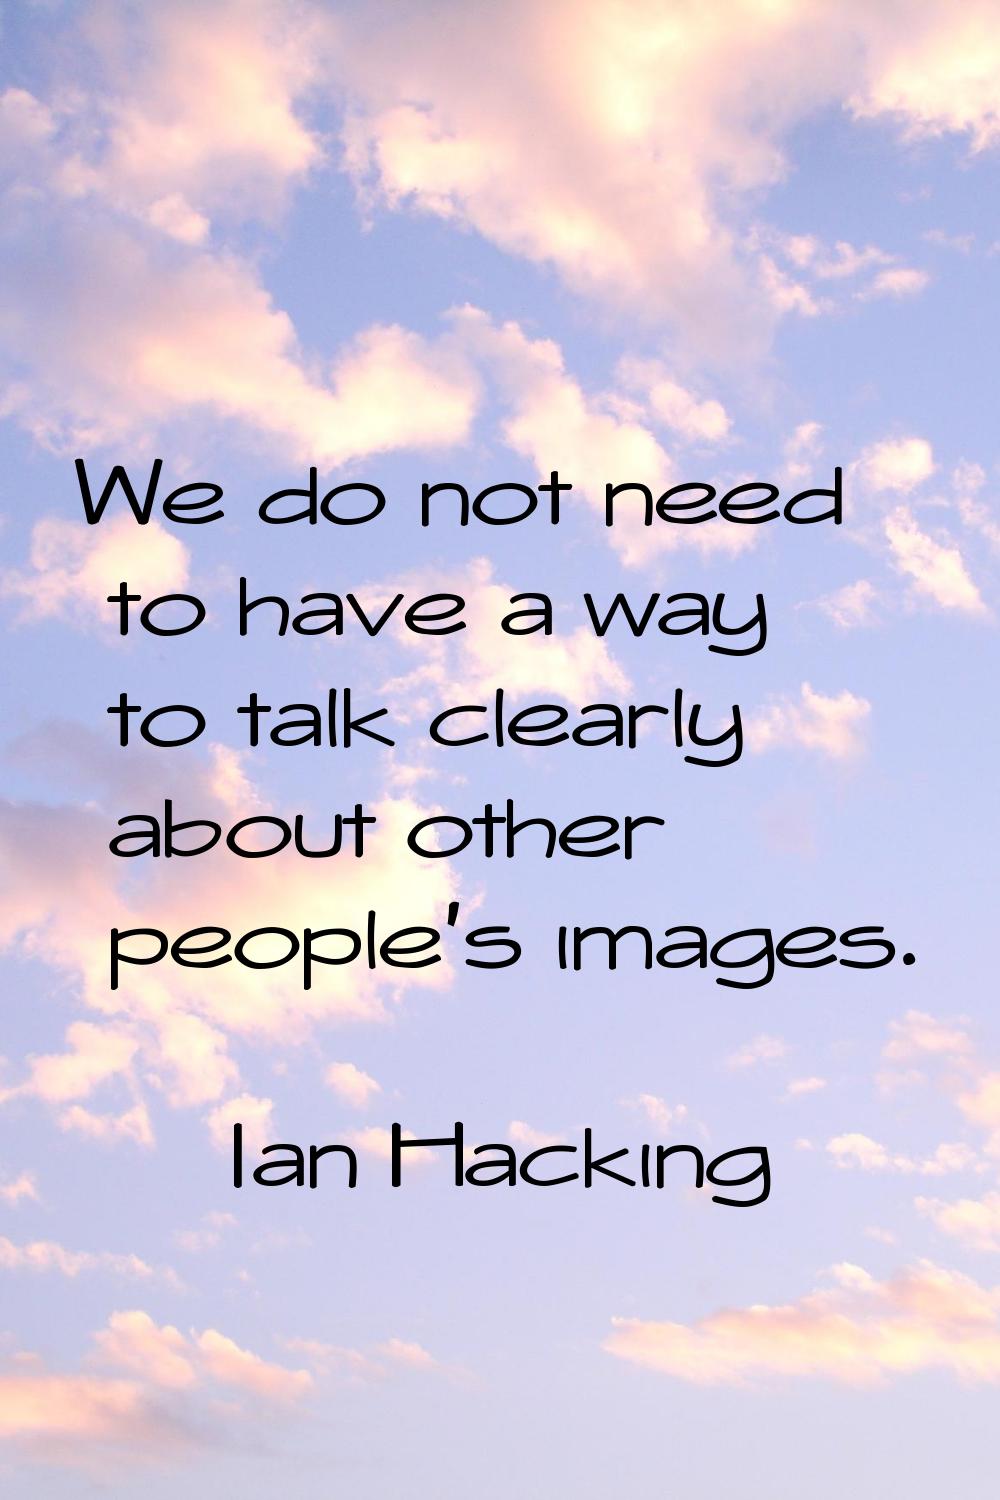 We do not need to have a way to talk clearly about other people's images.